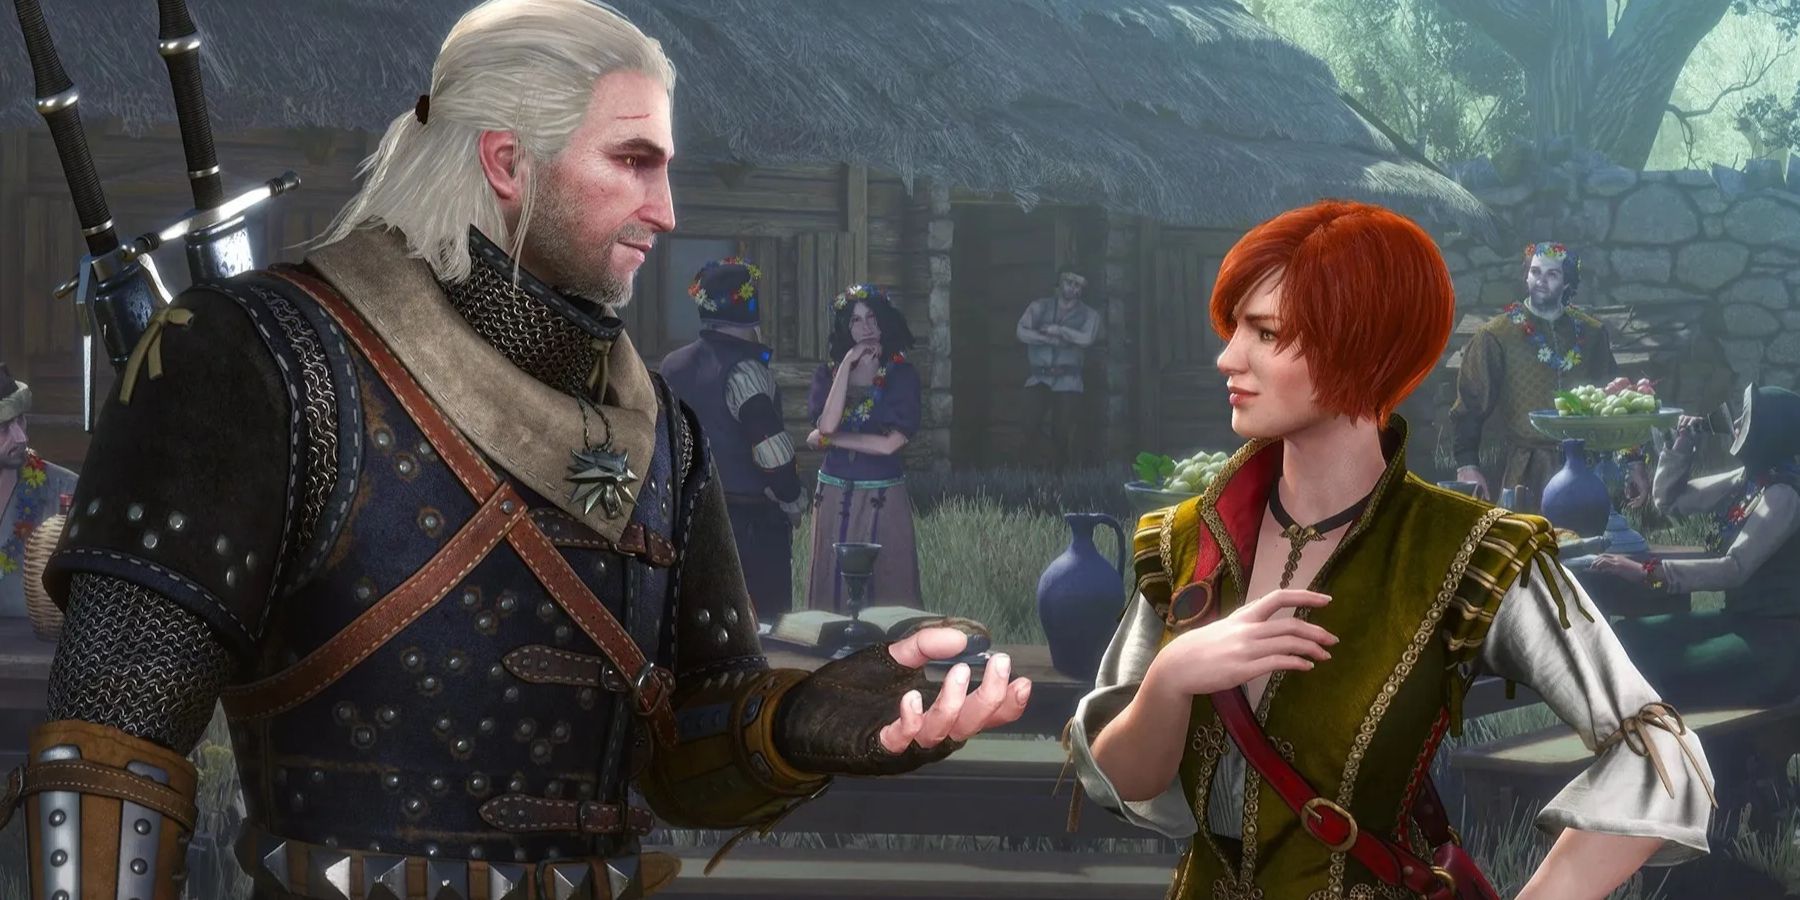 The Witcher 3 Geralt & Shani From Hearts Of Stone